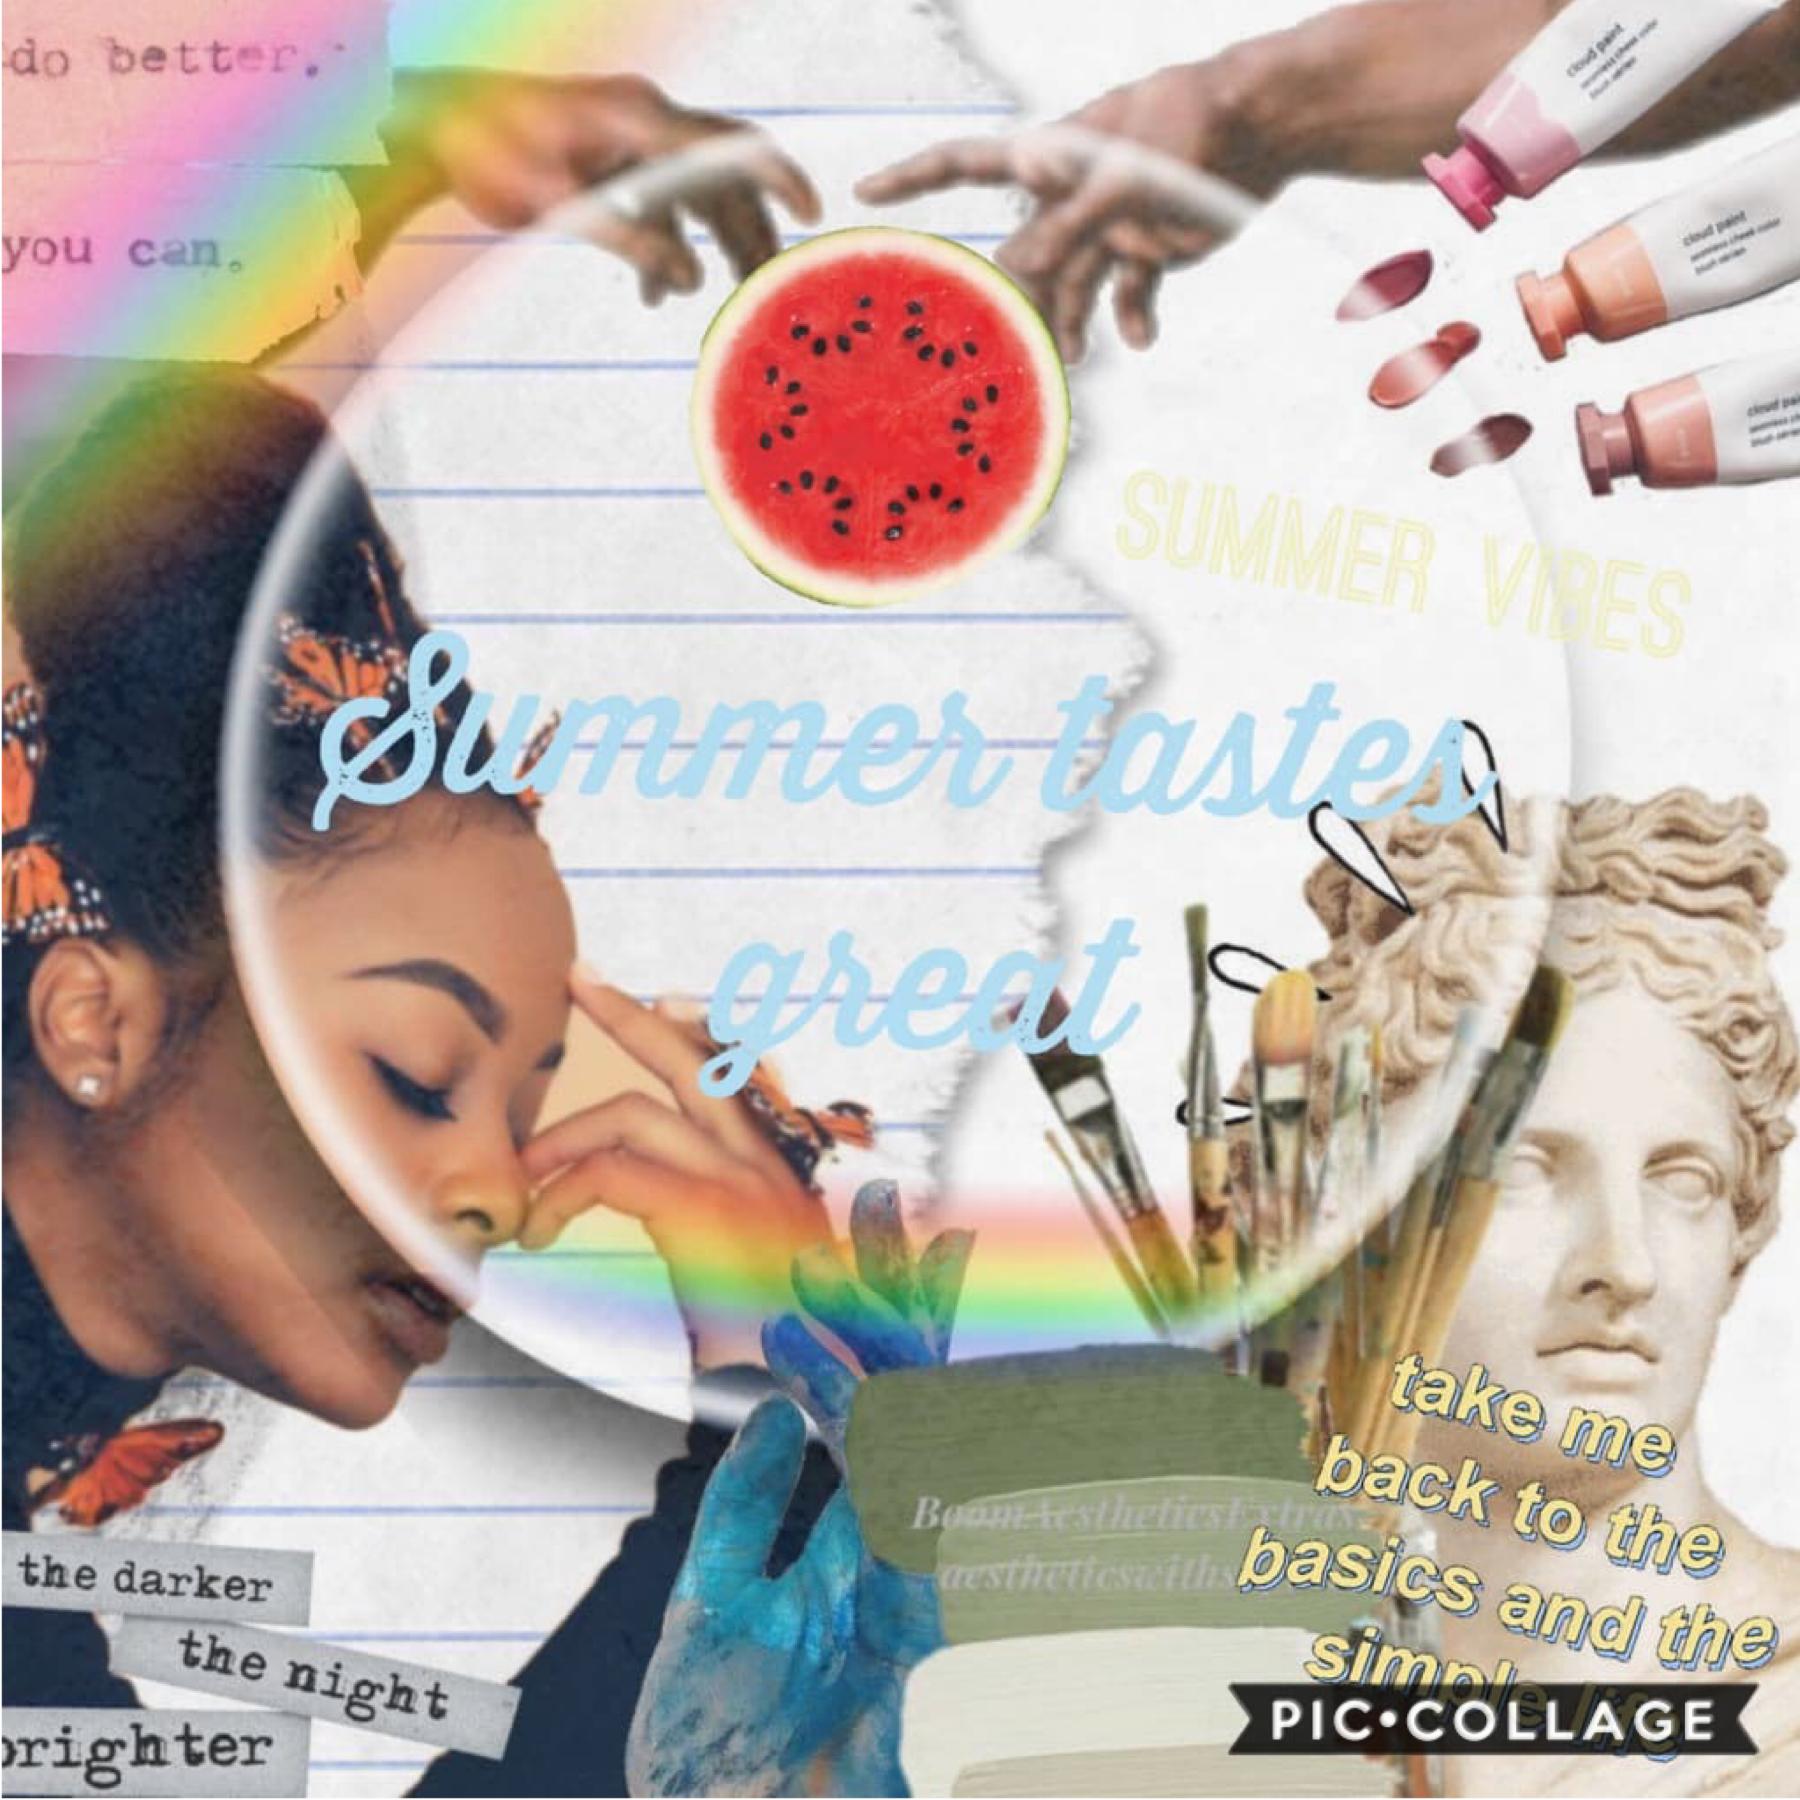 Collab with.....
My friend aestheticswithsophie!!  Go follower her!!!! Love from meee🤍🤍🤍